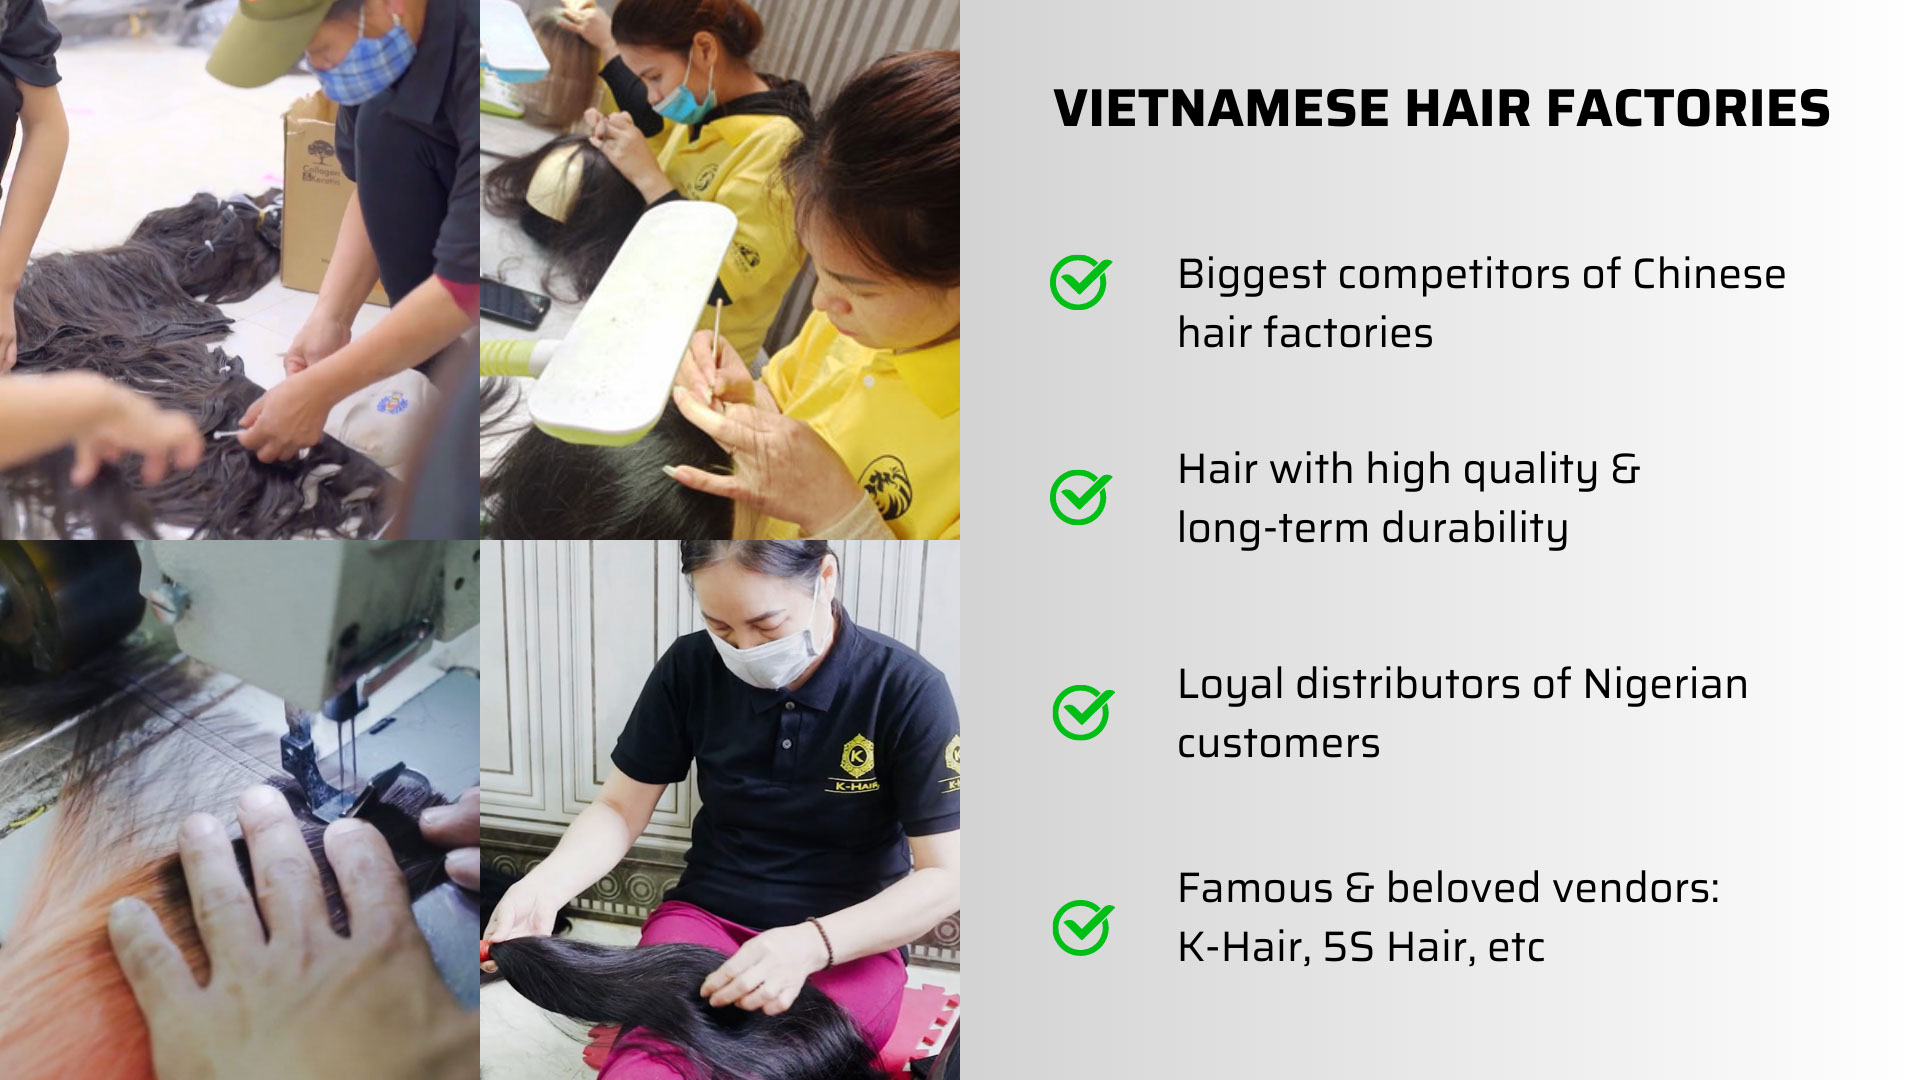 Vietnamese hair factories are famous for high quality